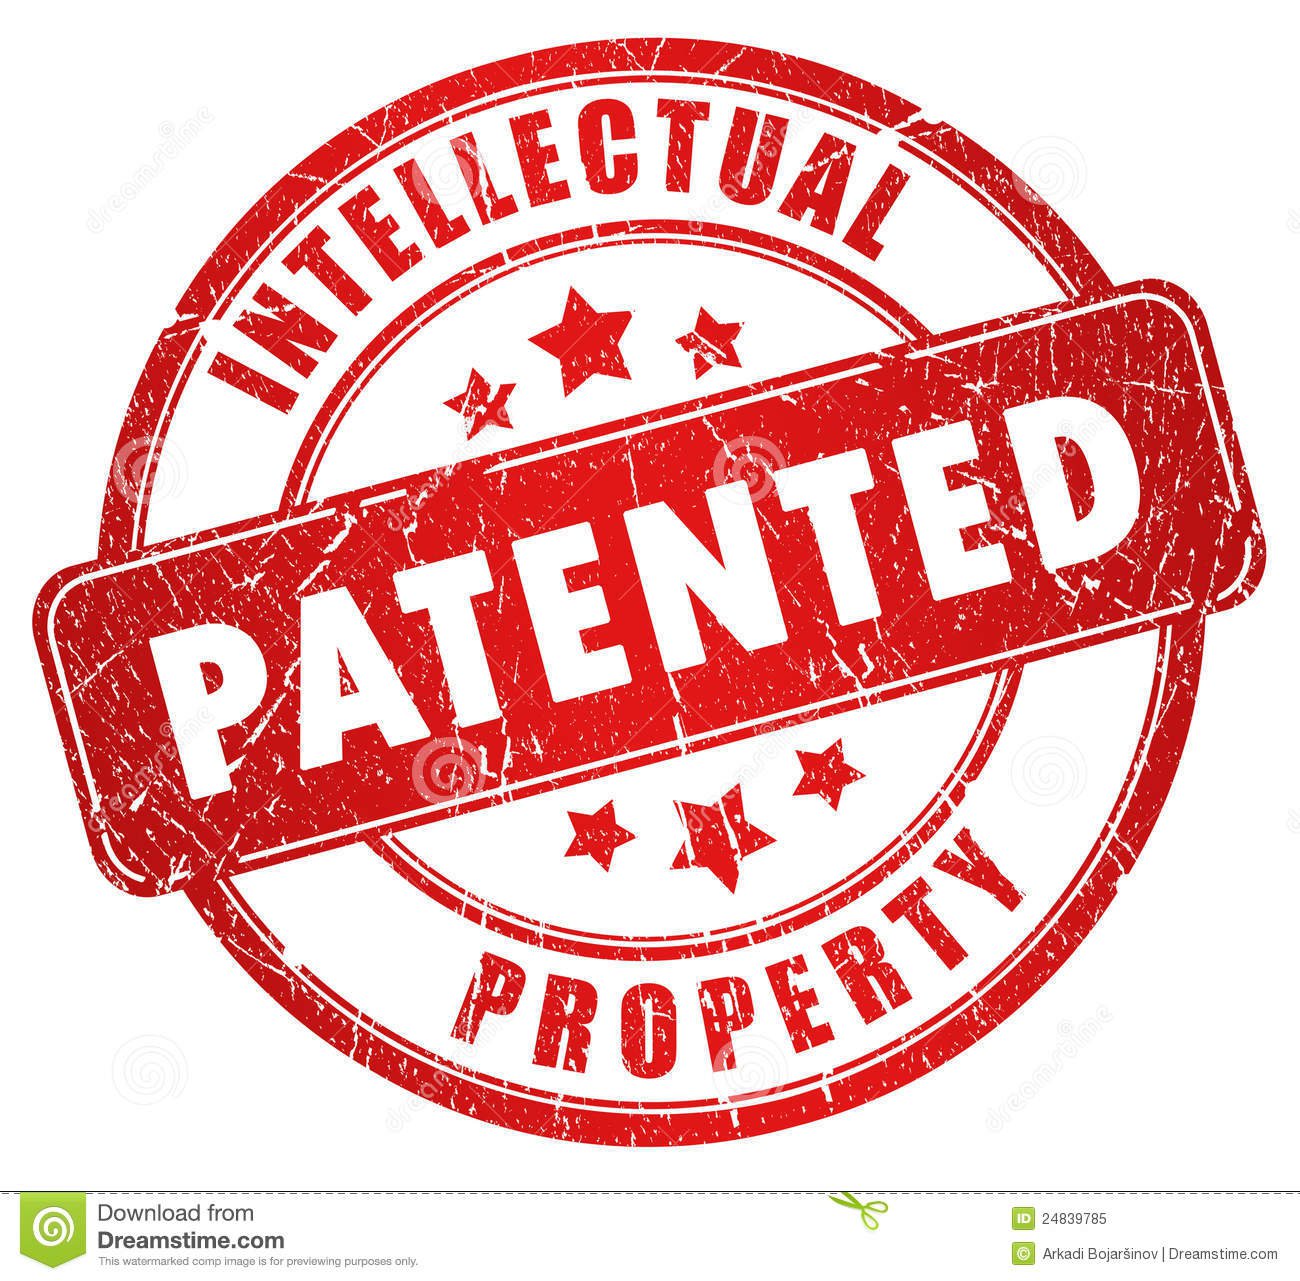 PATENT APPLICATION PROCEDURE IN TURKISH PATENT SYSTEM ACCORDING TO IP LAW (6769)